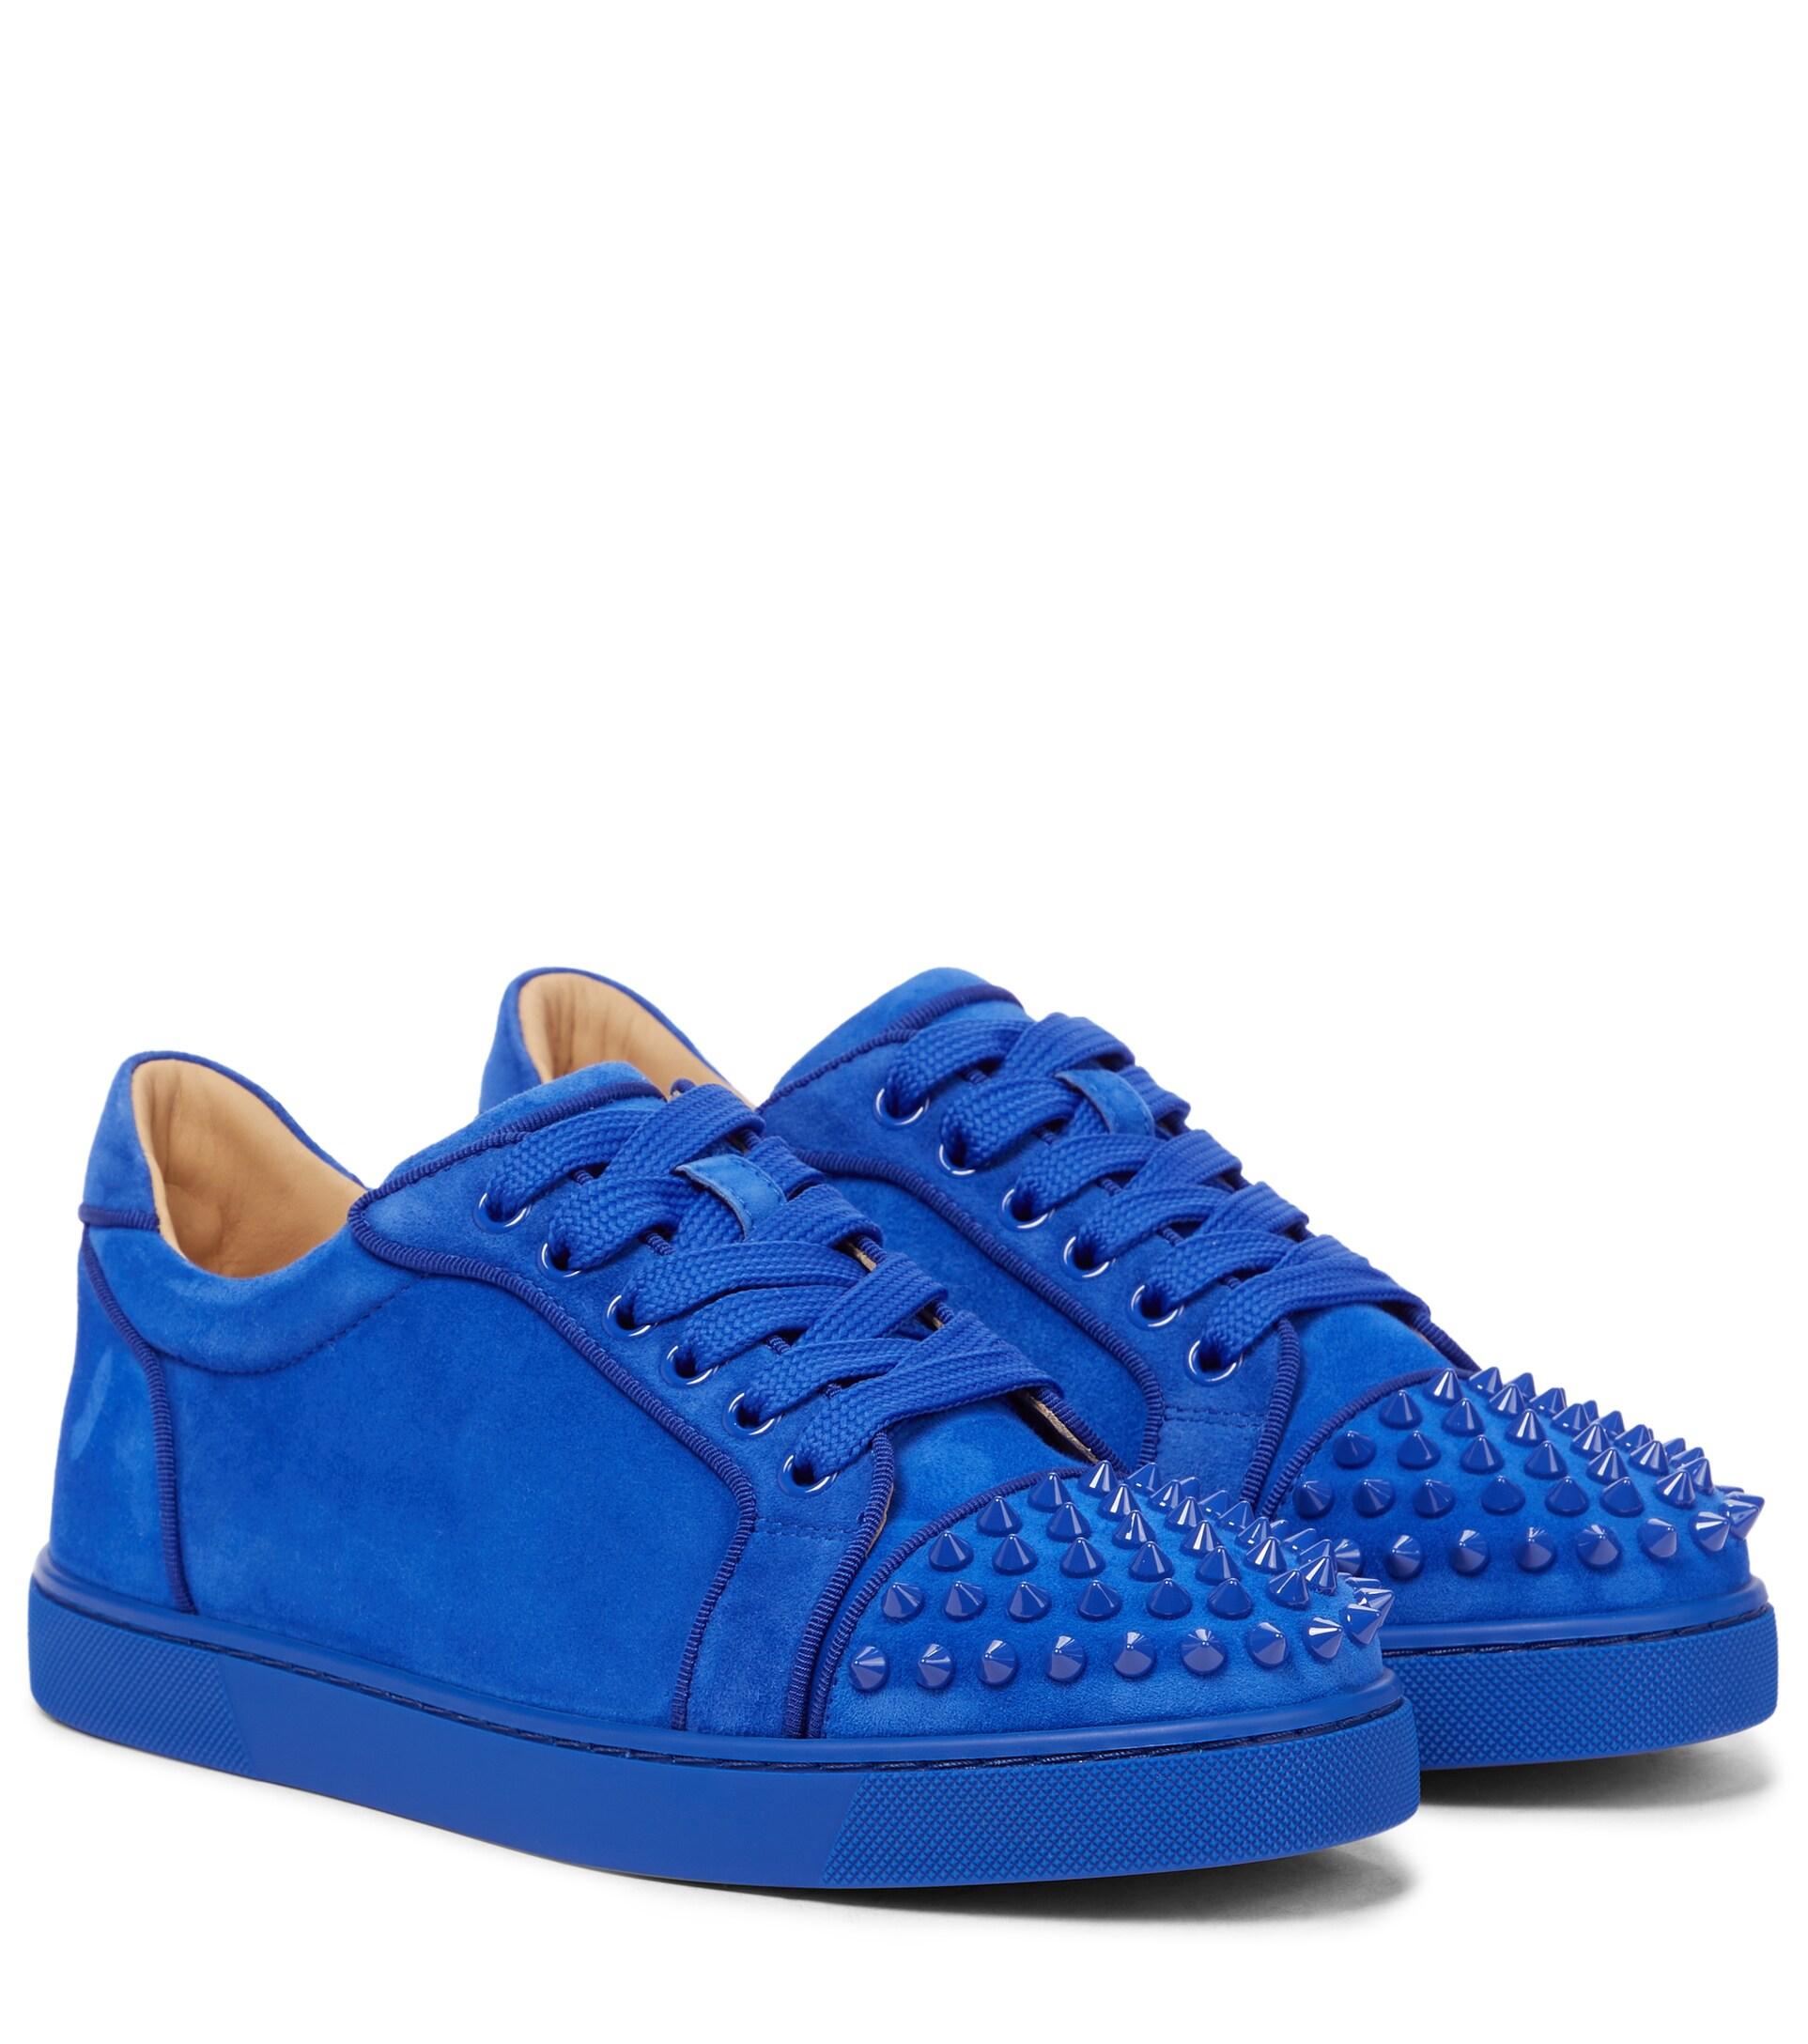 Christian Louboutin Vieira Spikes Suede Sneakers in Blue | Lyst